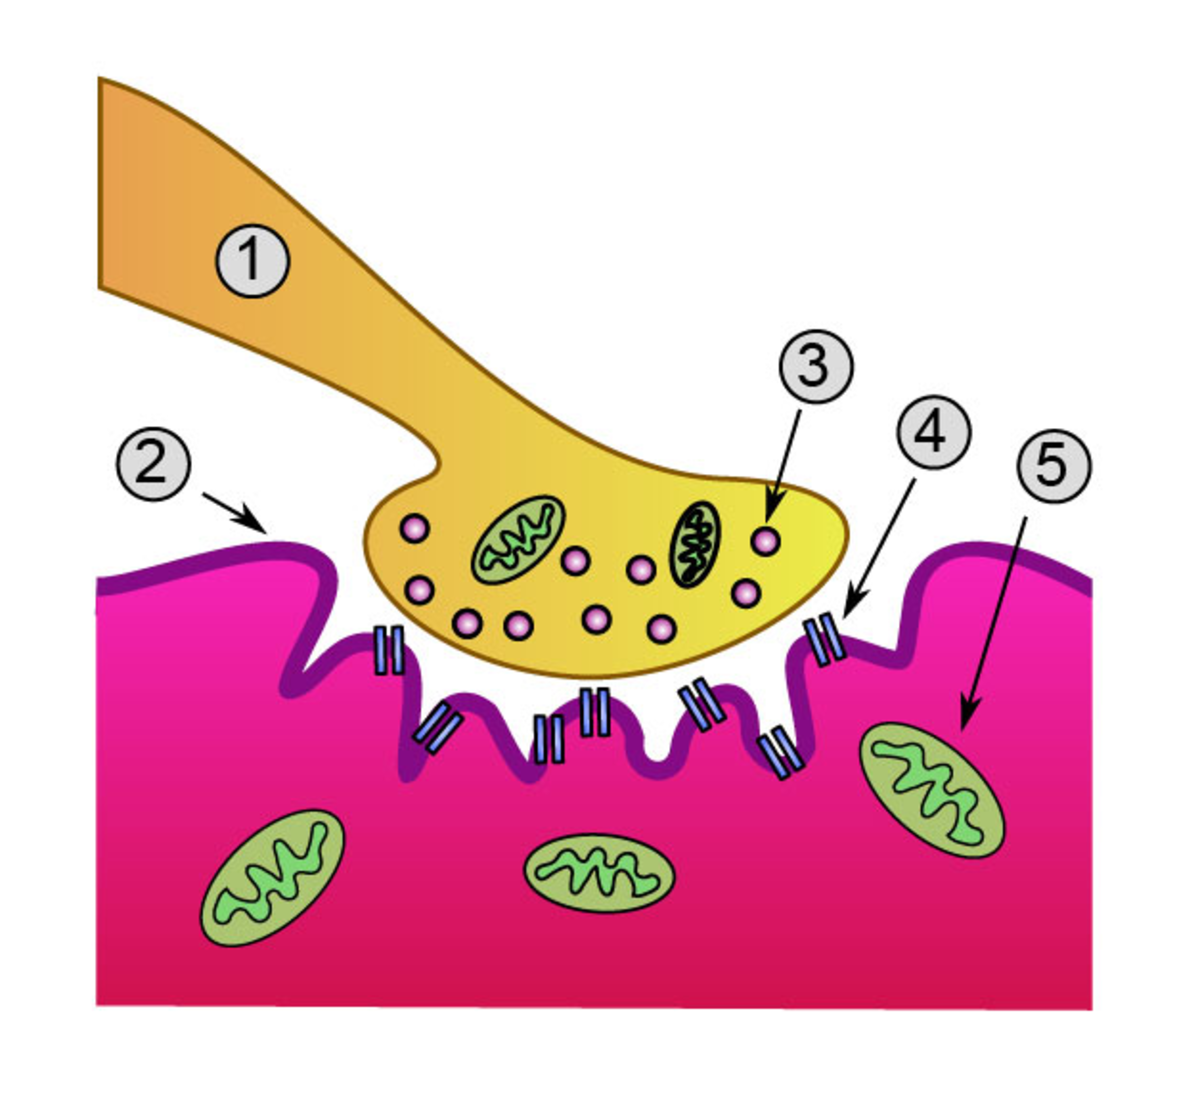 Diagram of neuromuscular junction: 1. Axon of nerve 2. Muscle fiber 3. Acetylcholine packet 4. Acetylcholine receptor on muscle